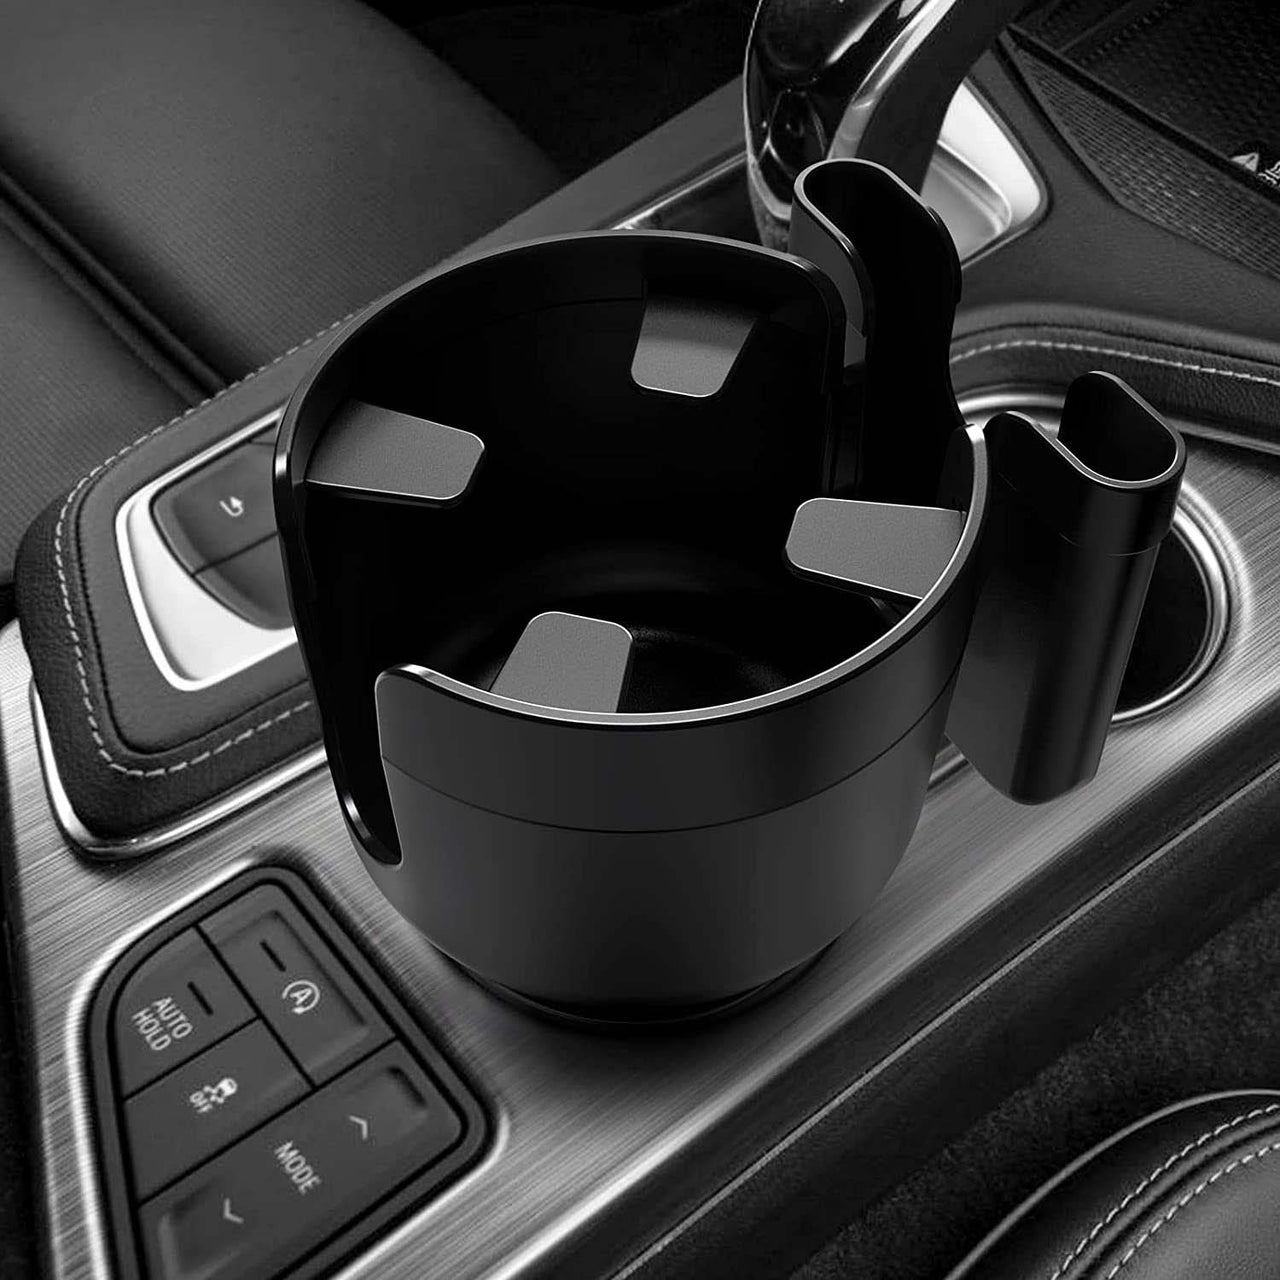 2-in-1 Car Cup Holder Expander Adapter with Adjustable Base, Custom Fit For Your Cars, Car Cup Holder Expander Organizer with Phone Holder, Fits 32/40 oz Drinks Bottles, Car Accessories SU15988